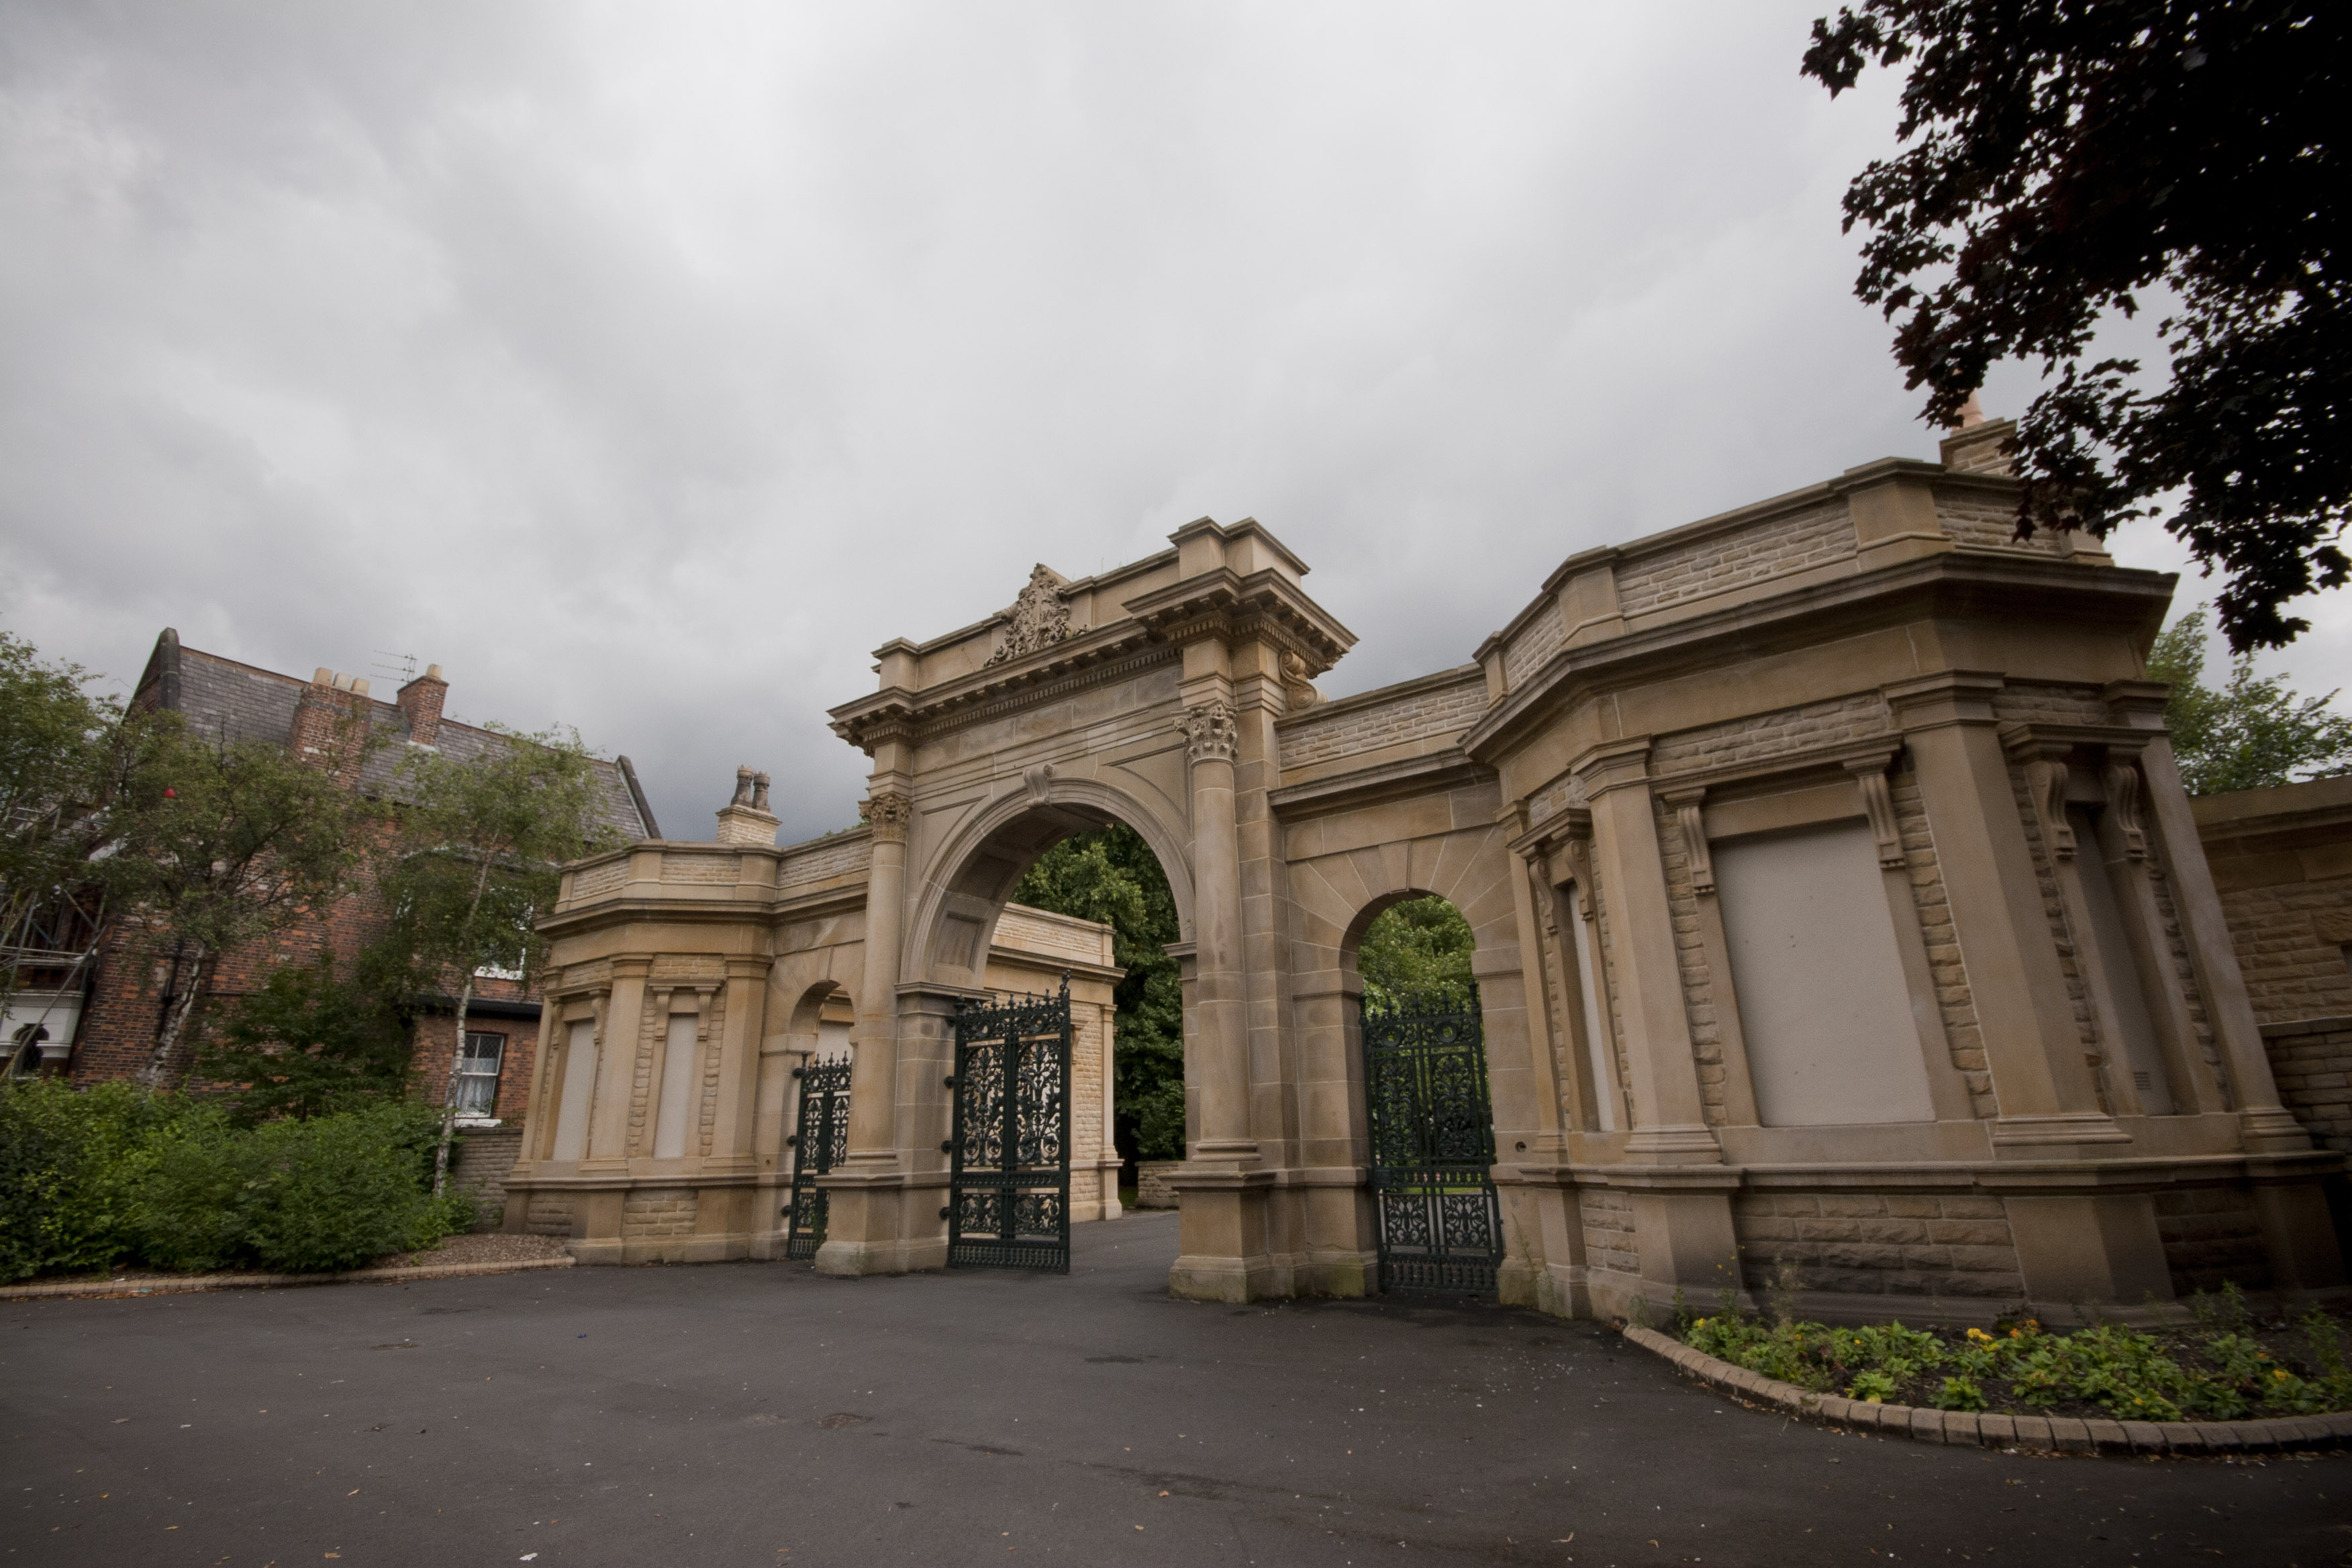 File:Trafford park old entrance lodge.jpg - Wikimedia Commons